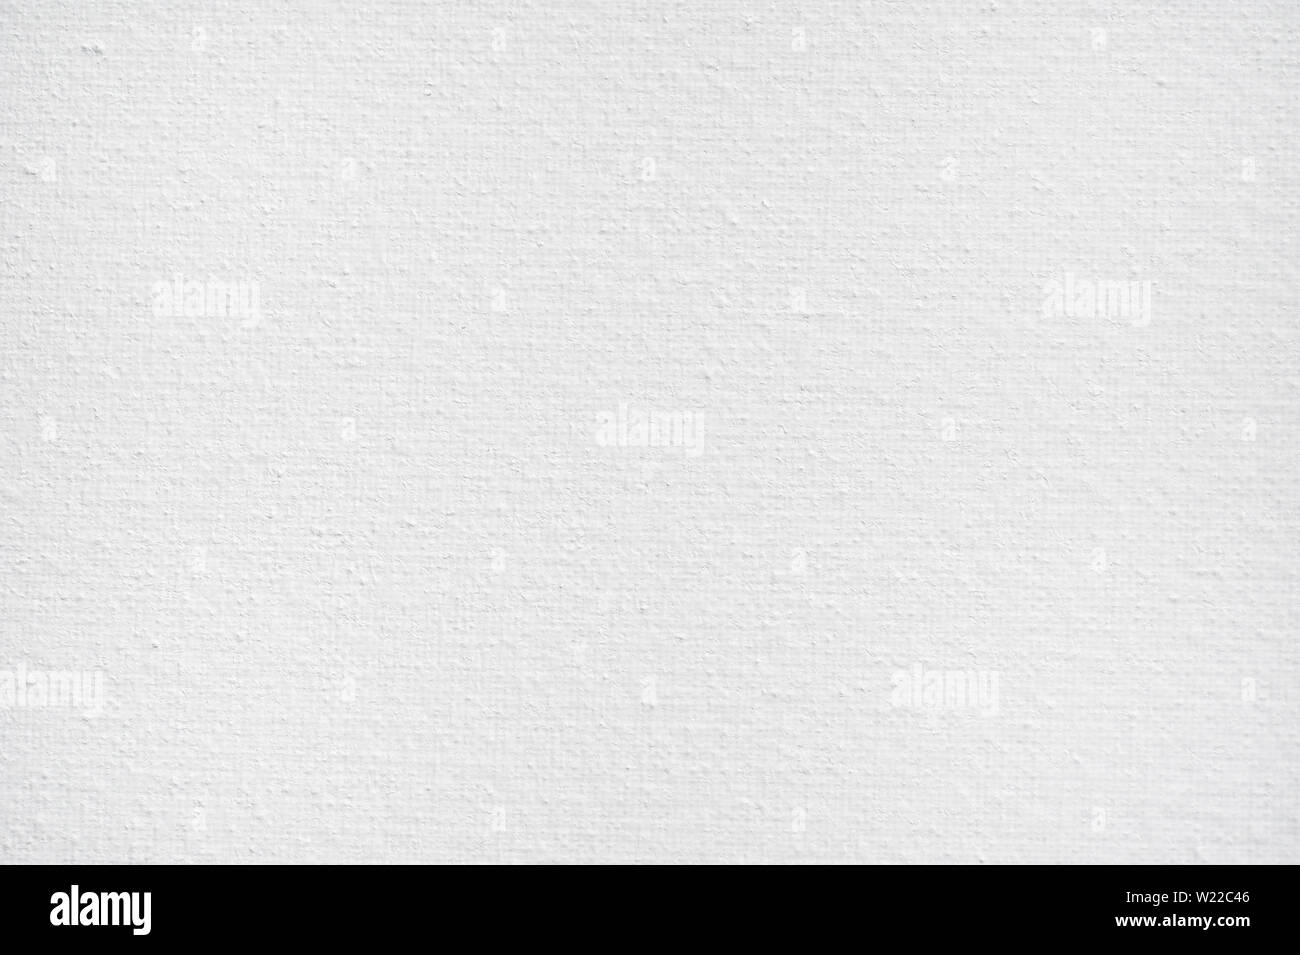 Close-up white Cotton canvas fabric background High Resolution texture for design Stock Photo